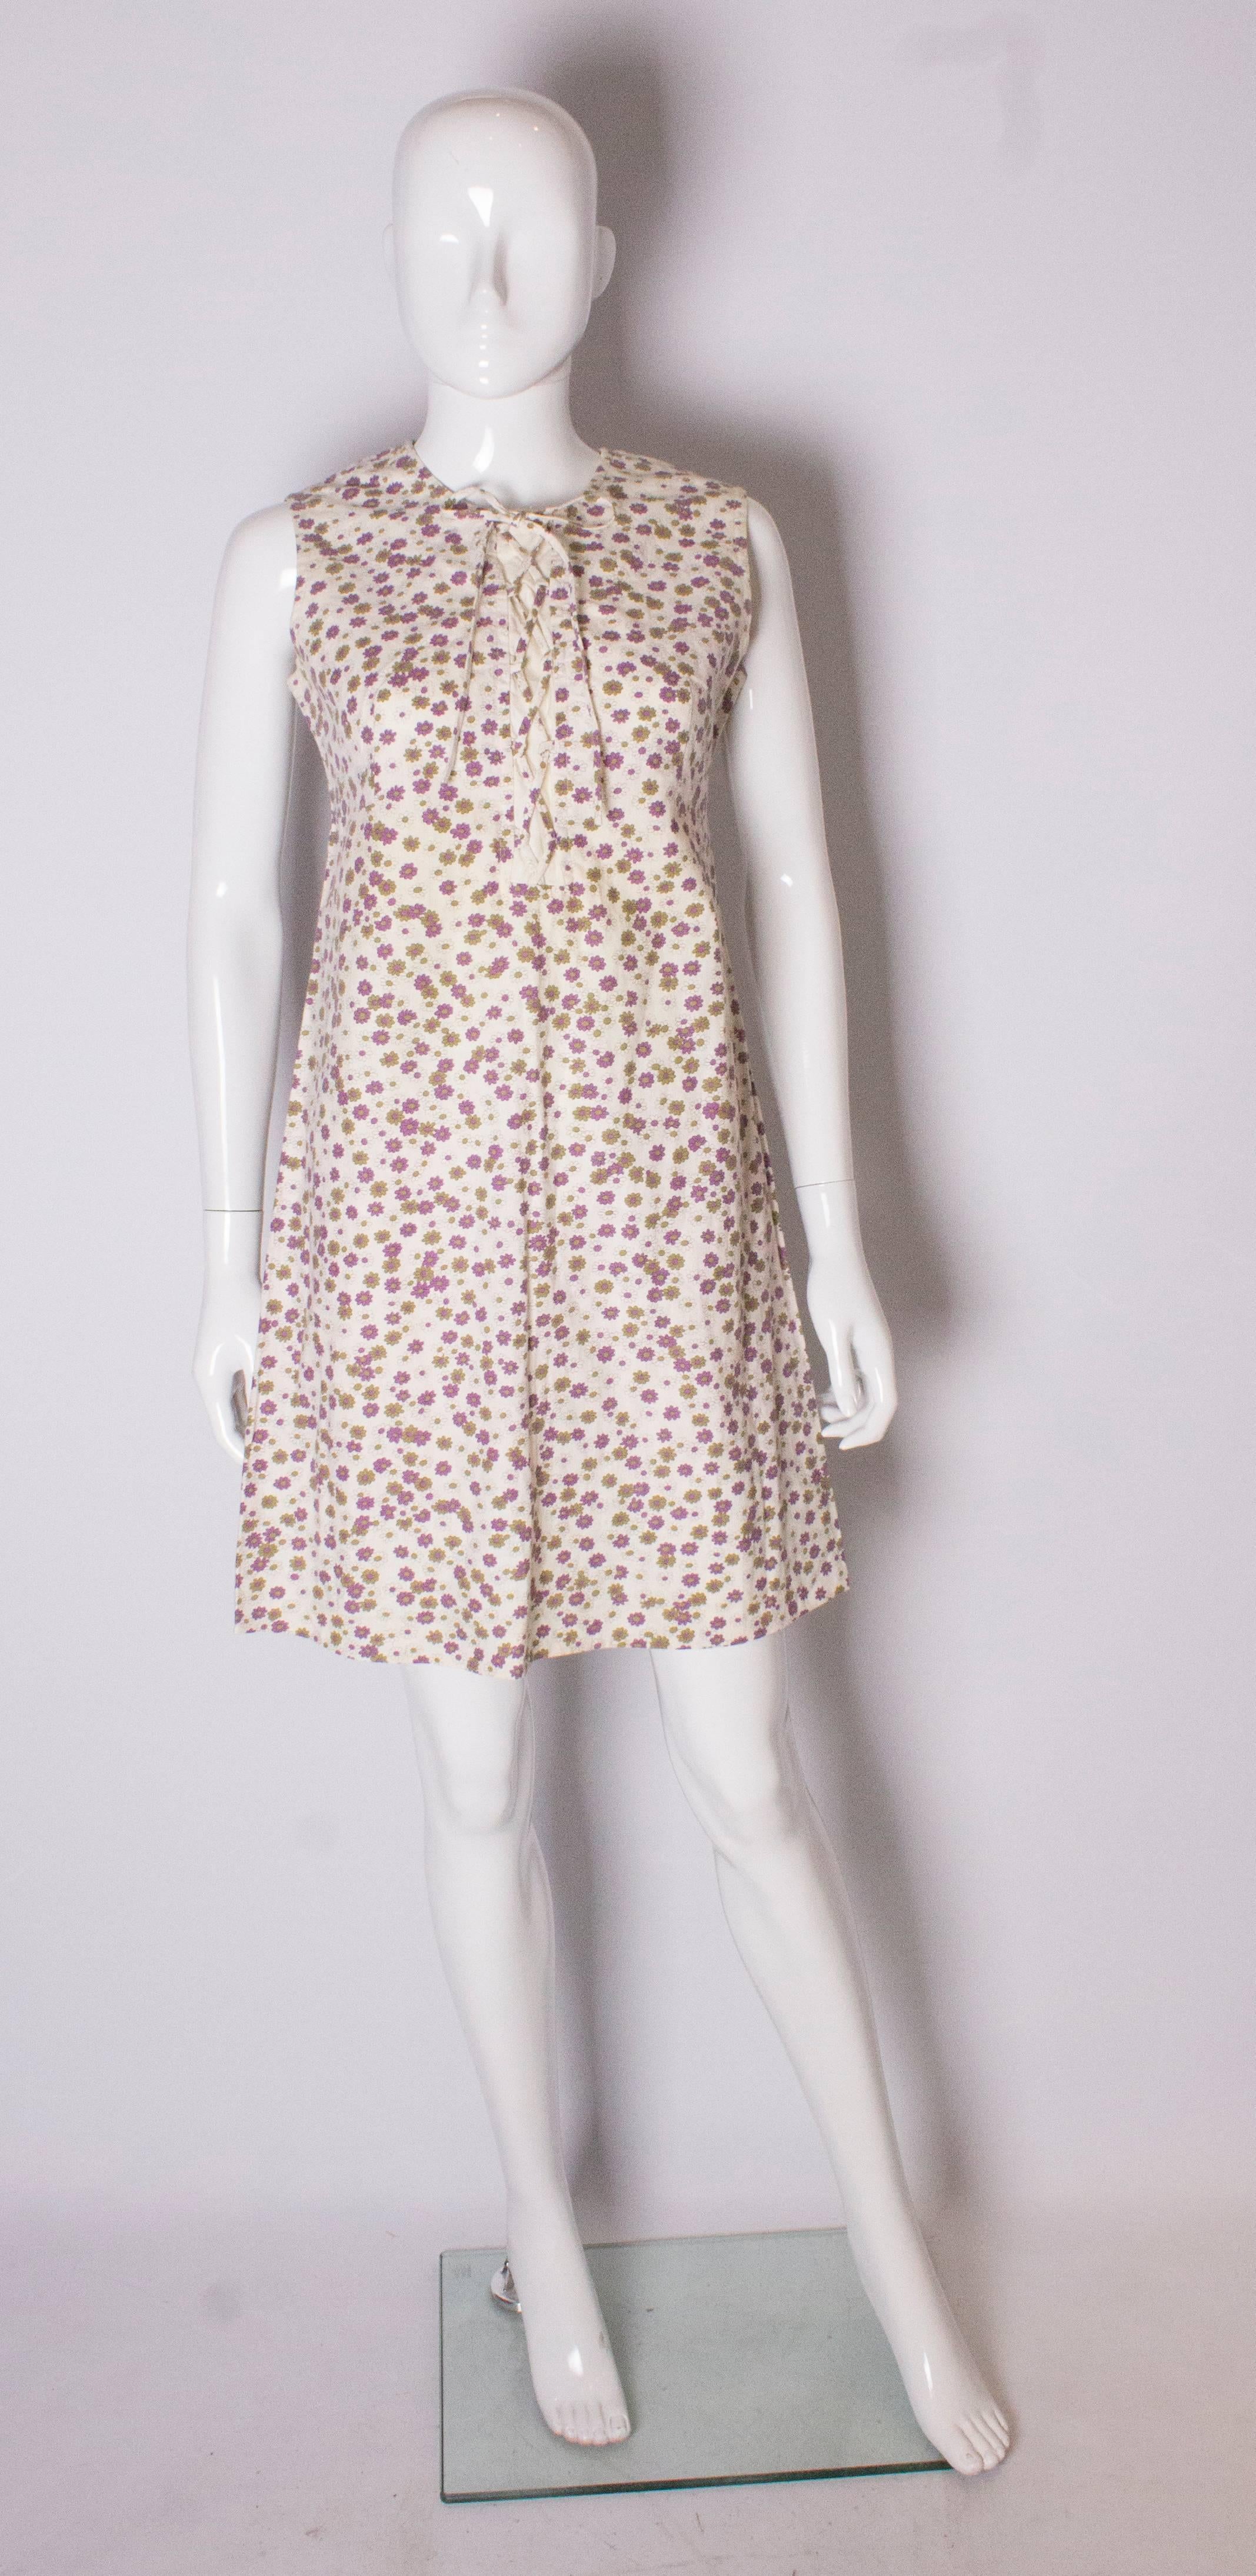 A cute  cotton dress for Summer. The dress is  in a purple, kahki and cream print, and has a lace up front and central back zip.